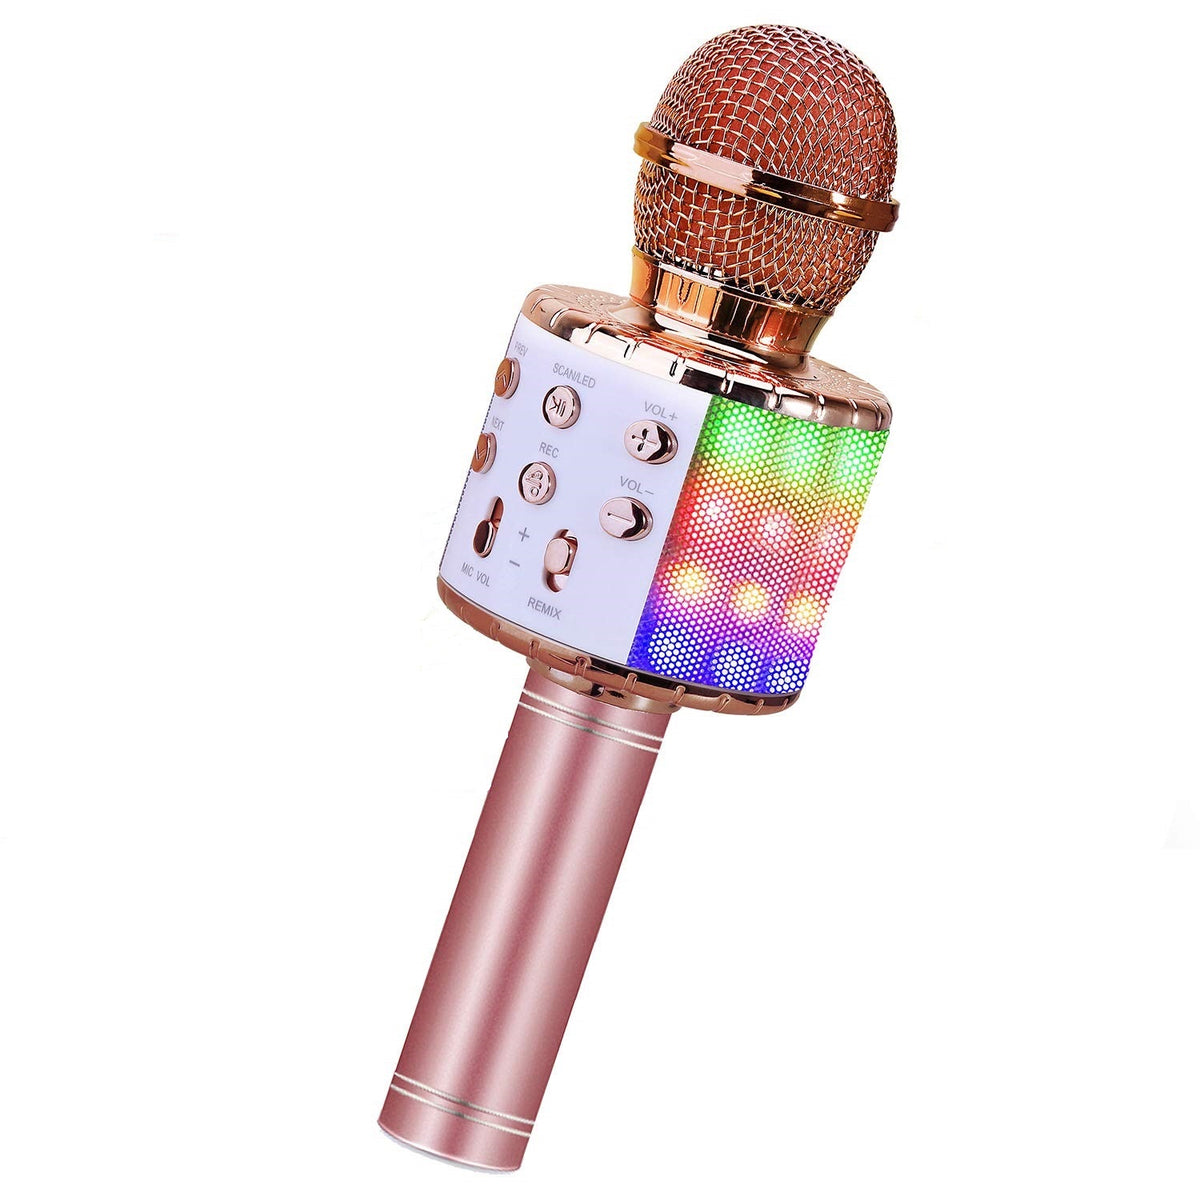 Amazing 7 in 1 Karaoke Microphone with LED light show, a karaoke party in  your hand! – Mr Entertainer Shop